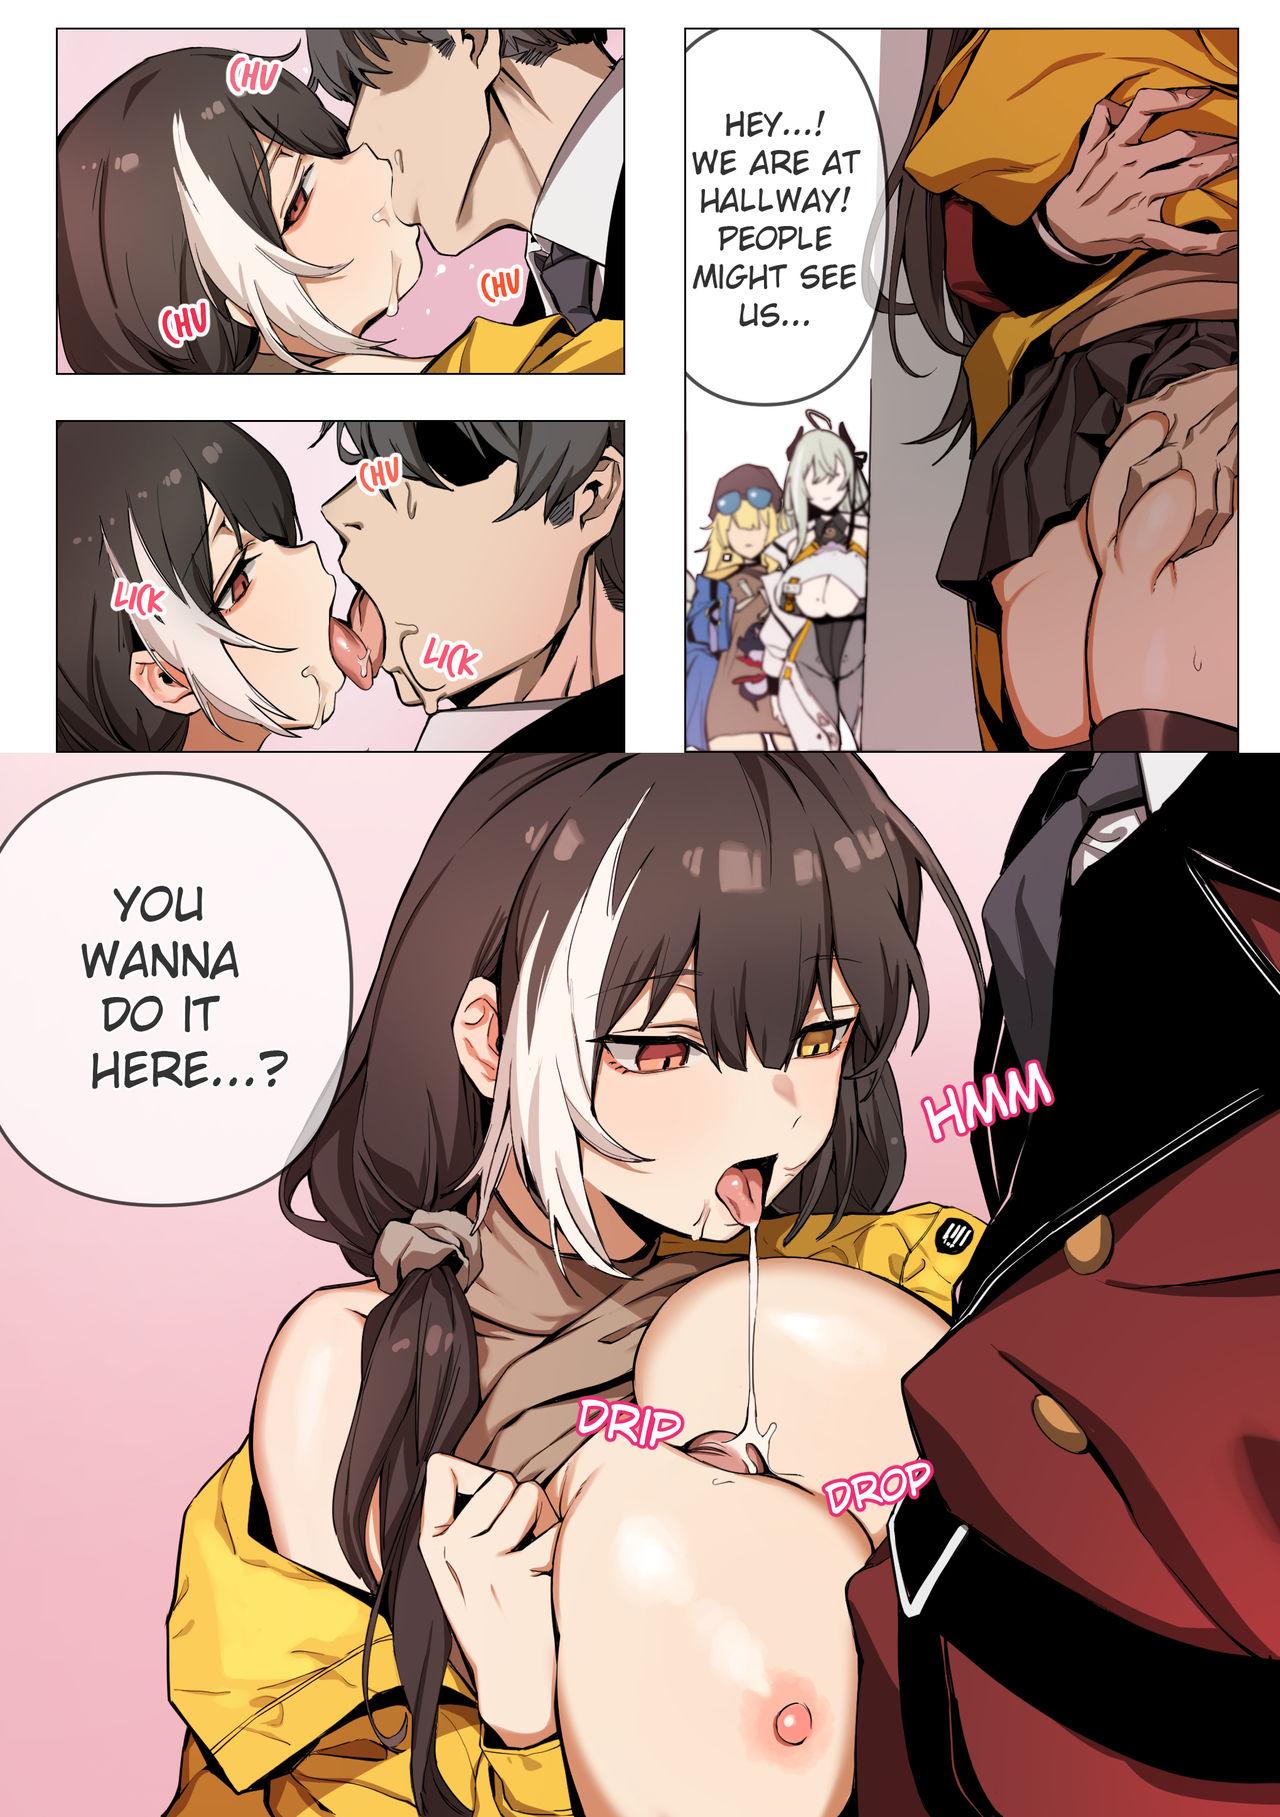 Casting ro635 - Girls frontline Pure18 - Page 3